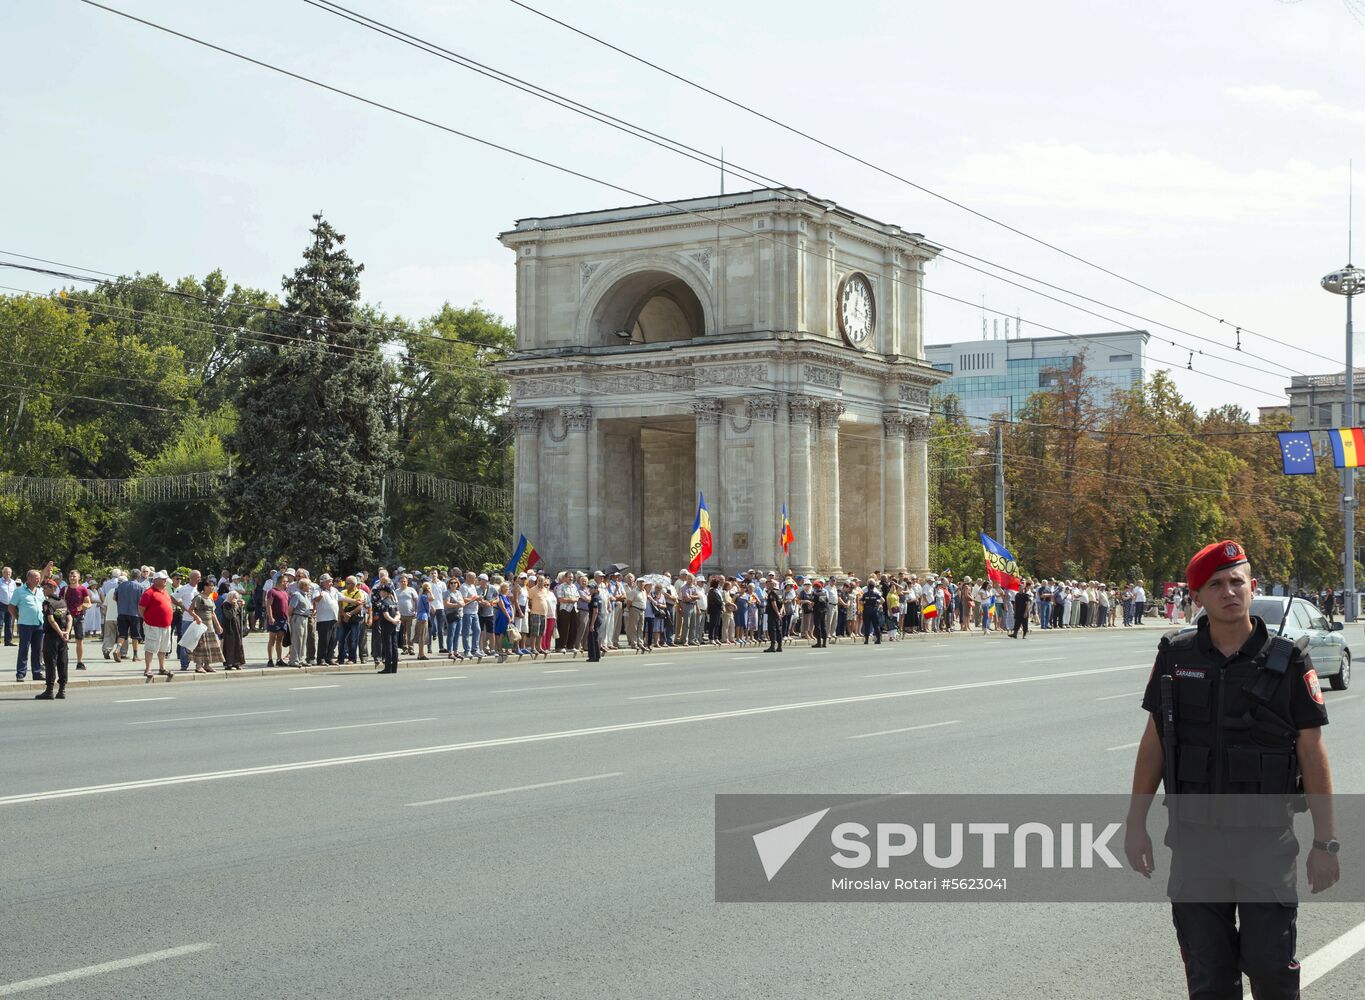 Supporters of unification of Moldova and Romania stage rally in Chisinau